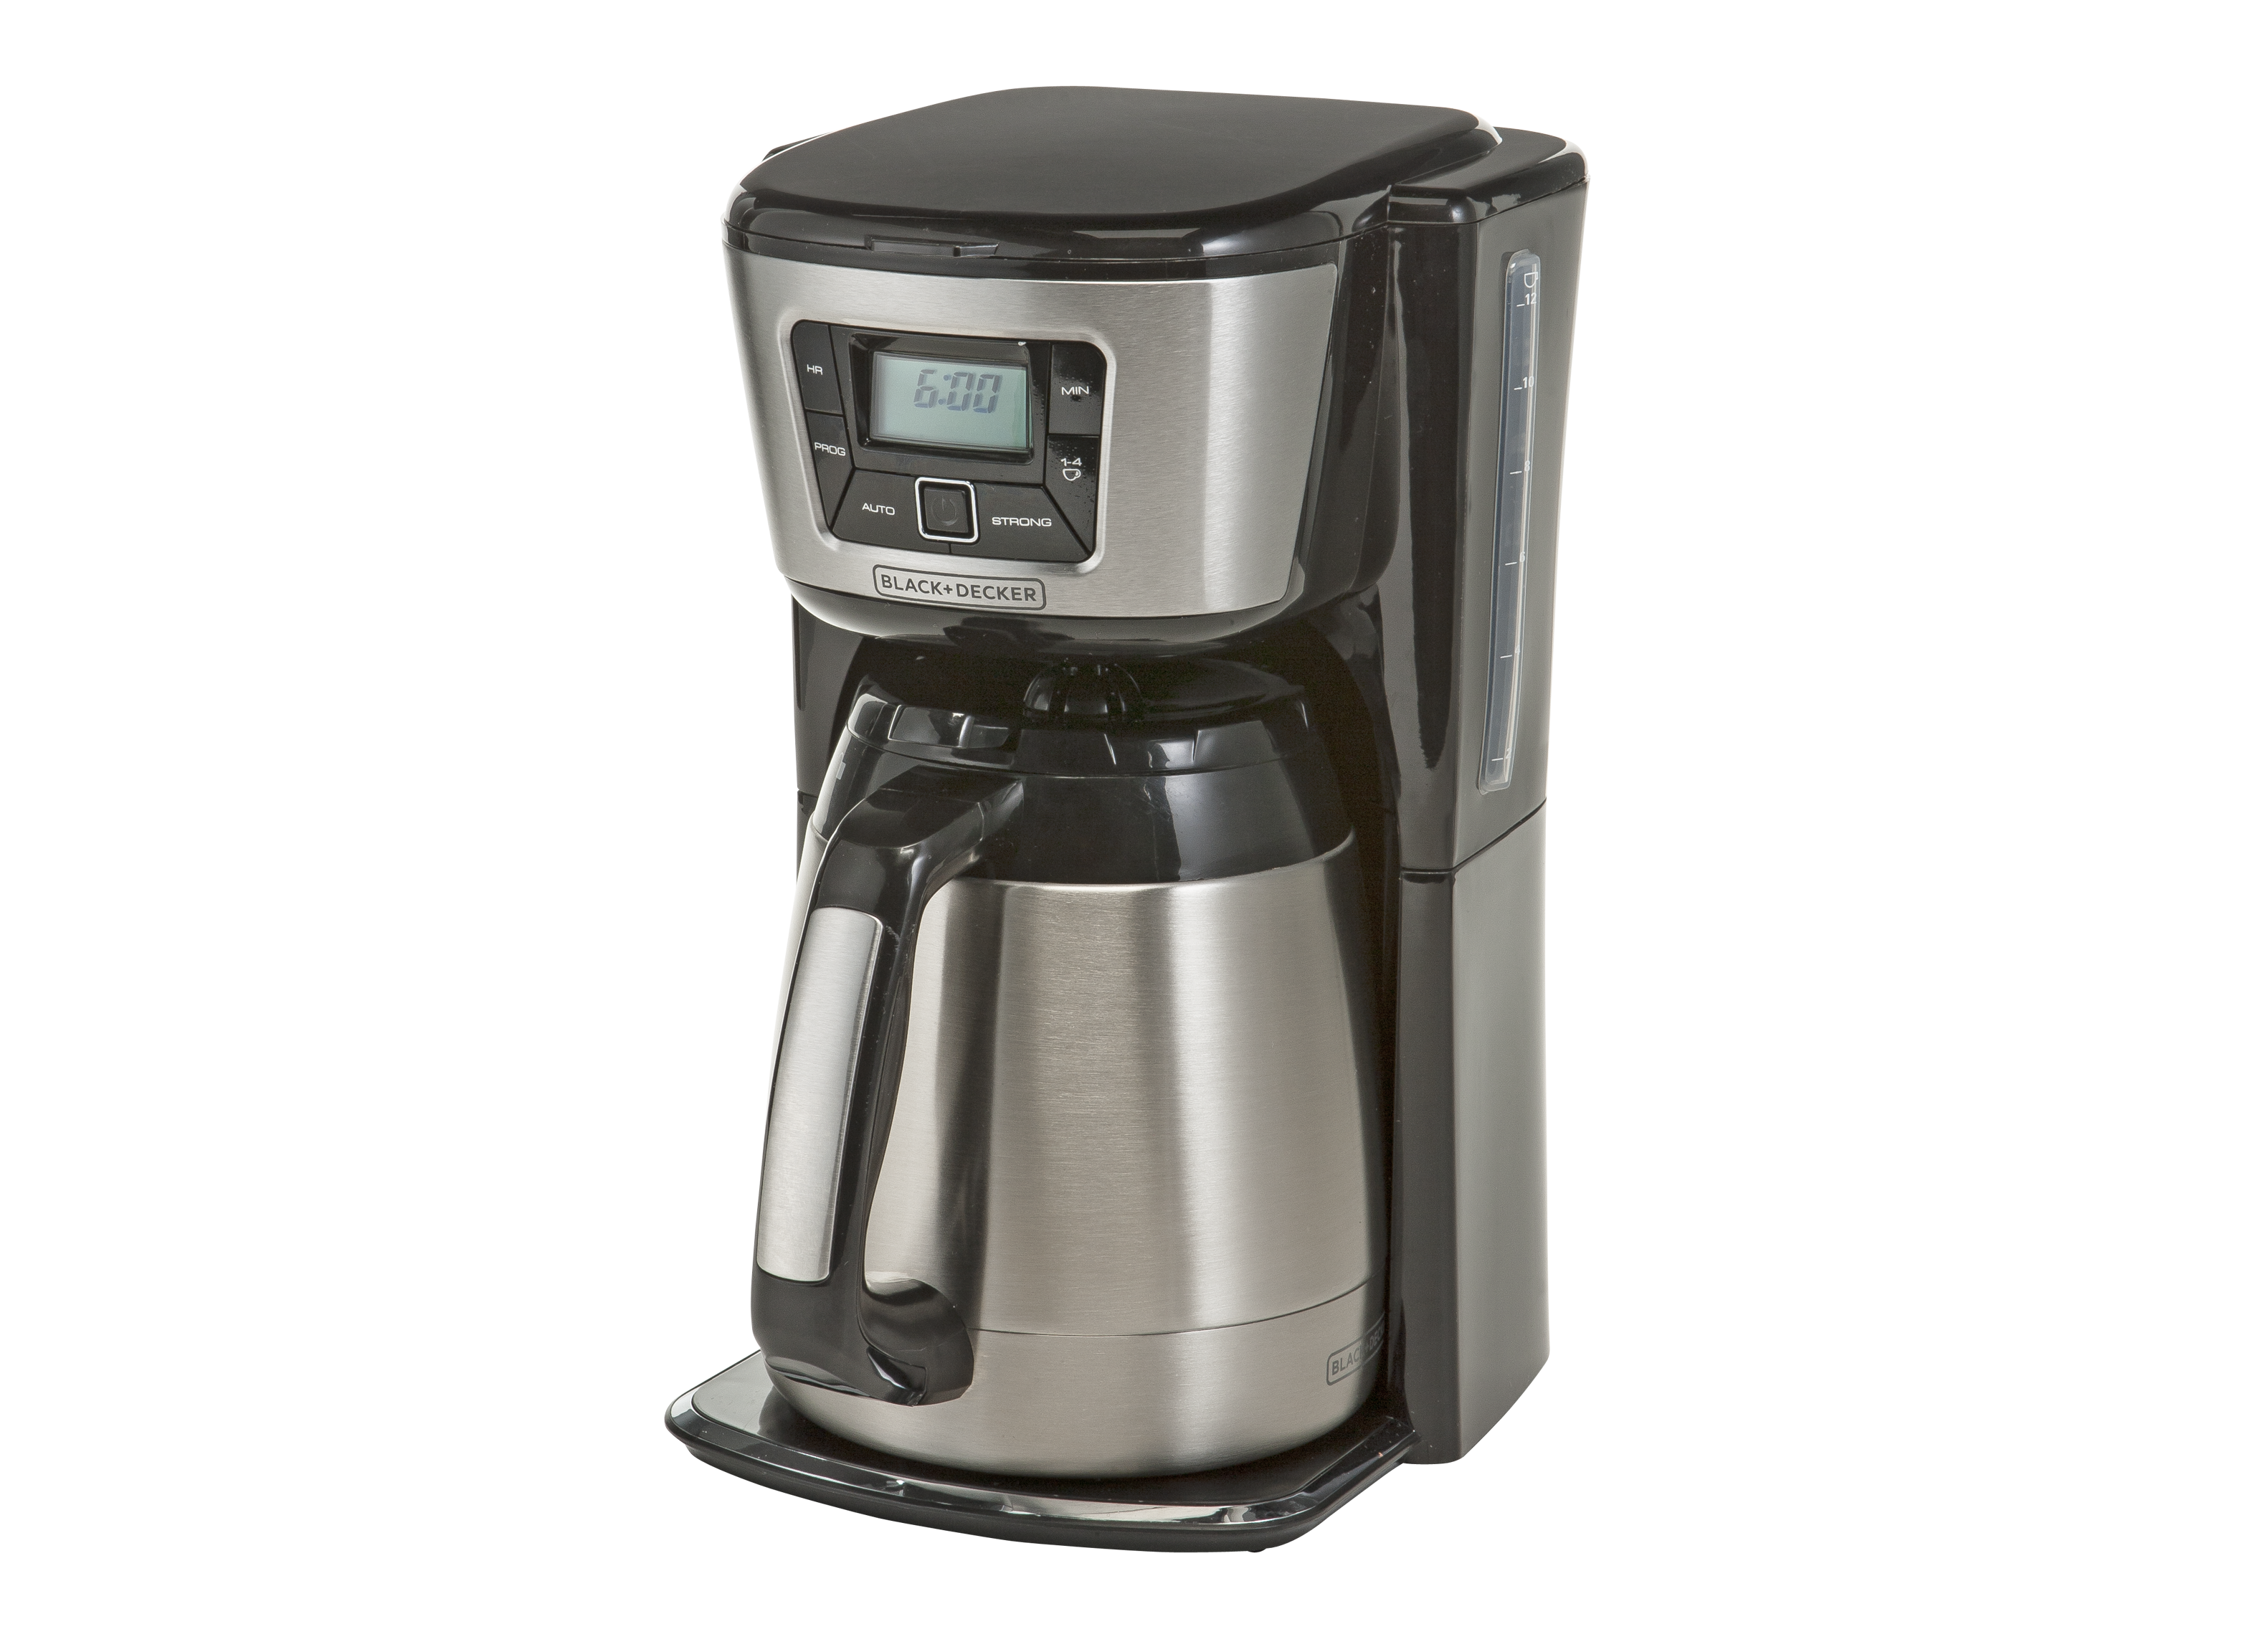 https://crdms.images.consumerreports.org/prod/products/cr/models/291734-coffeemakers-blackdecker-evenstreamcm2035b.png